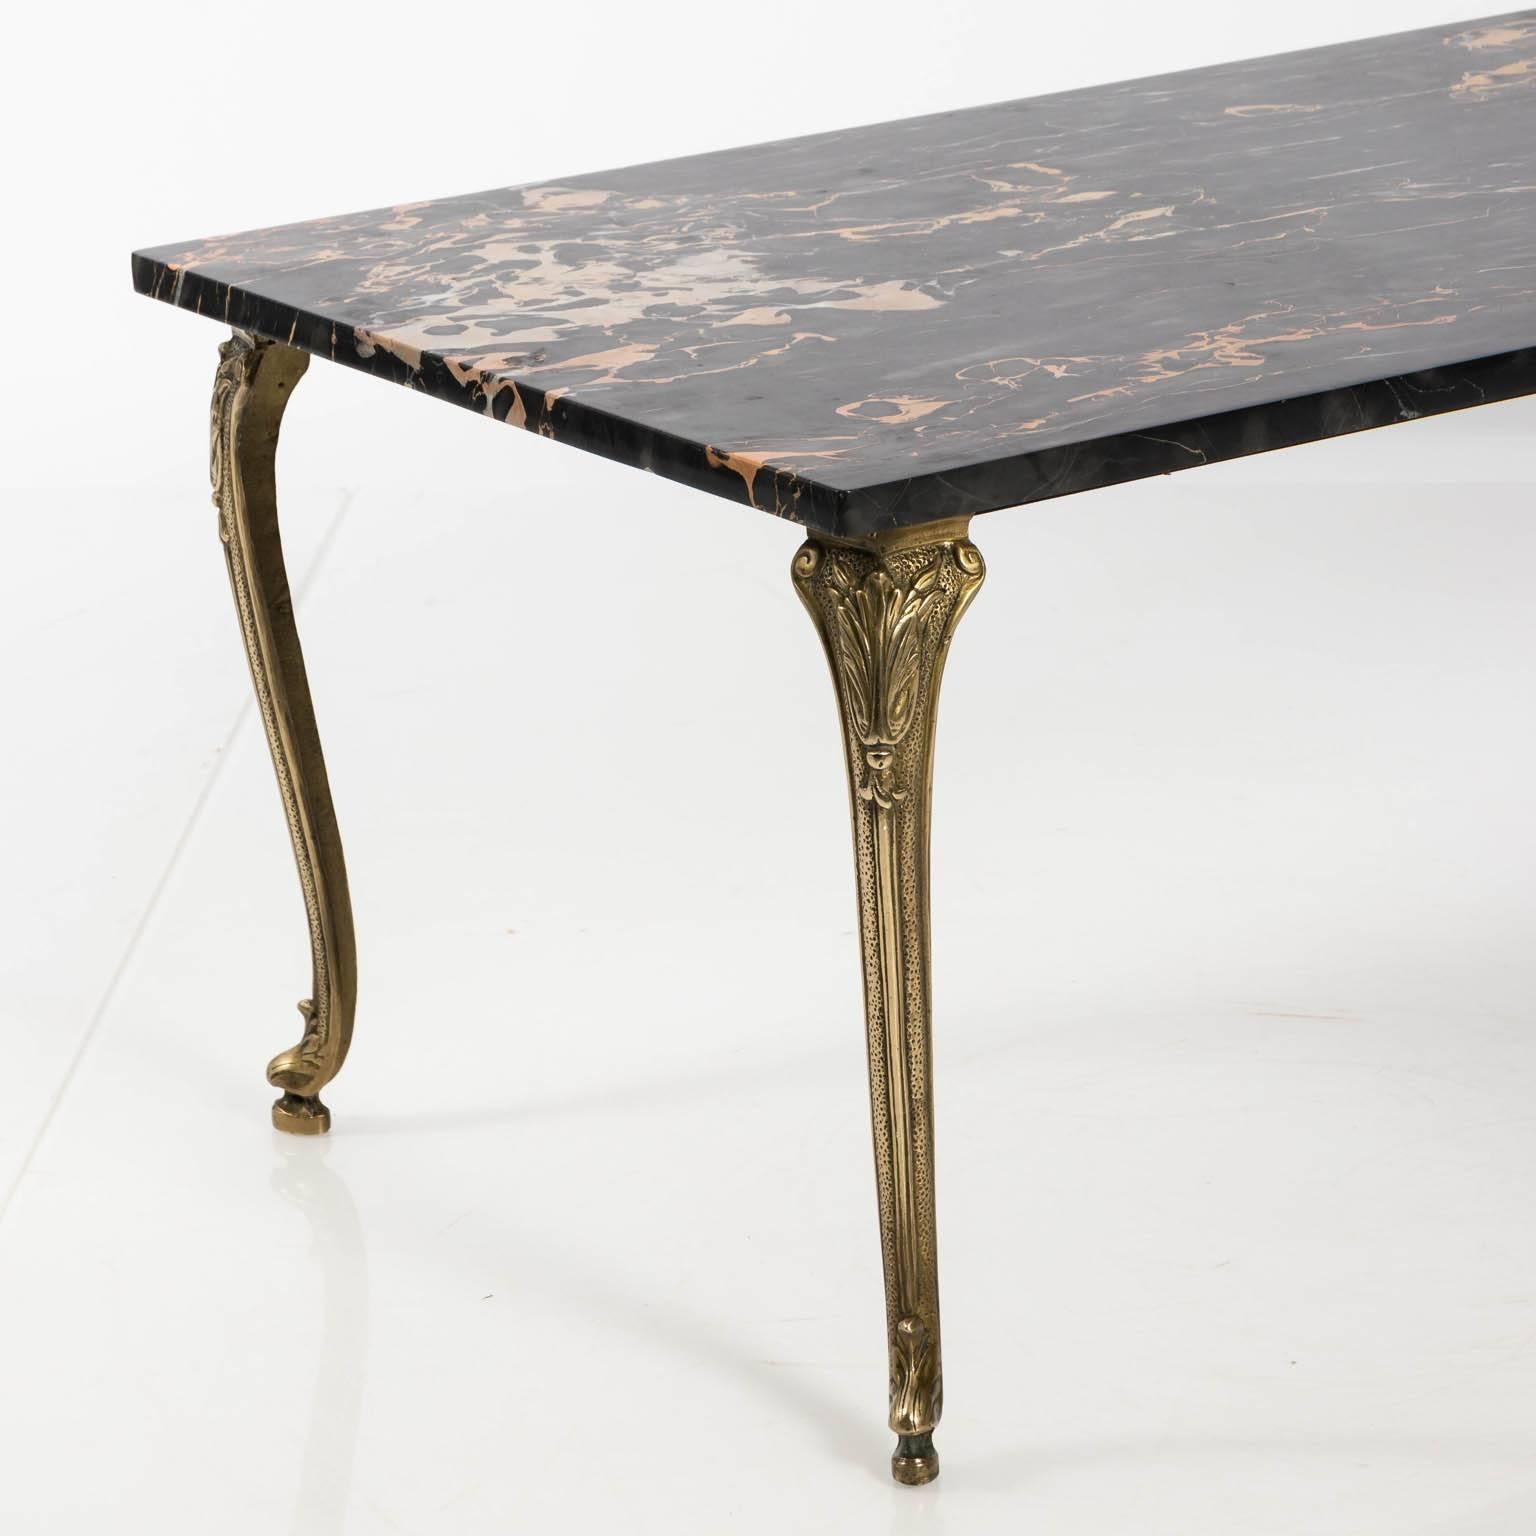 Early 1900s Art Nouveau brass low table with black Egyptian marble top, cabriole legs decorated with a lotus flower motif.
 